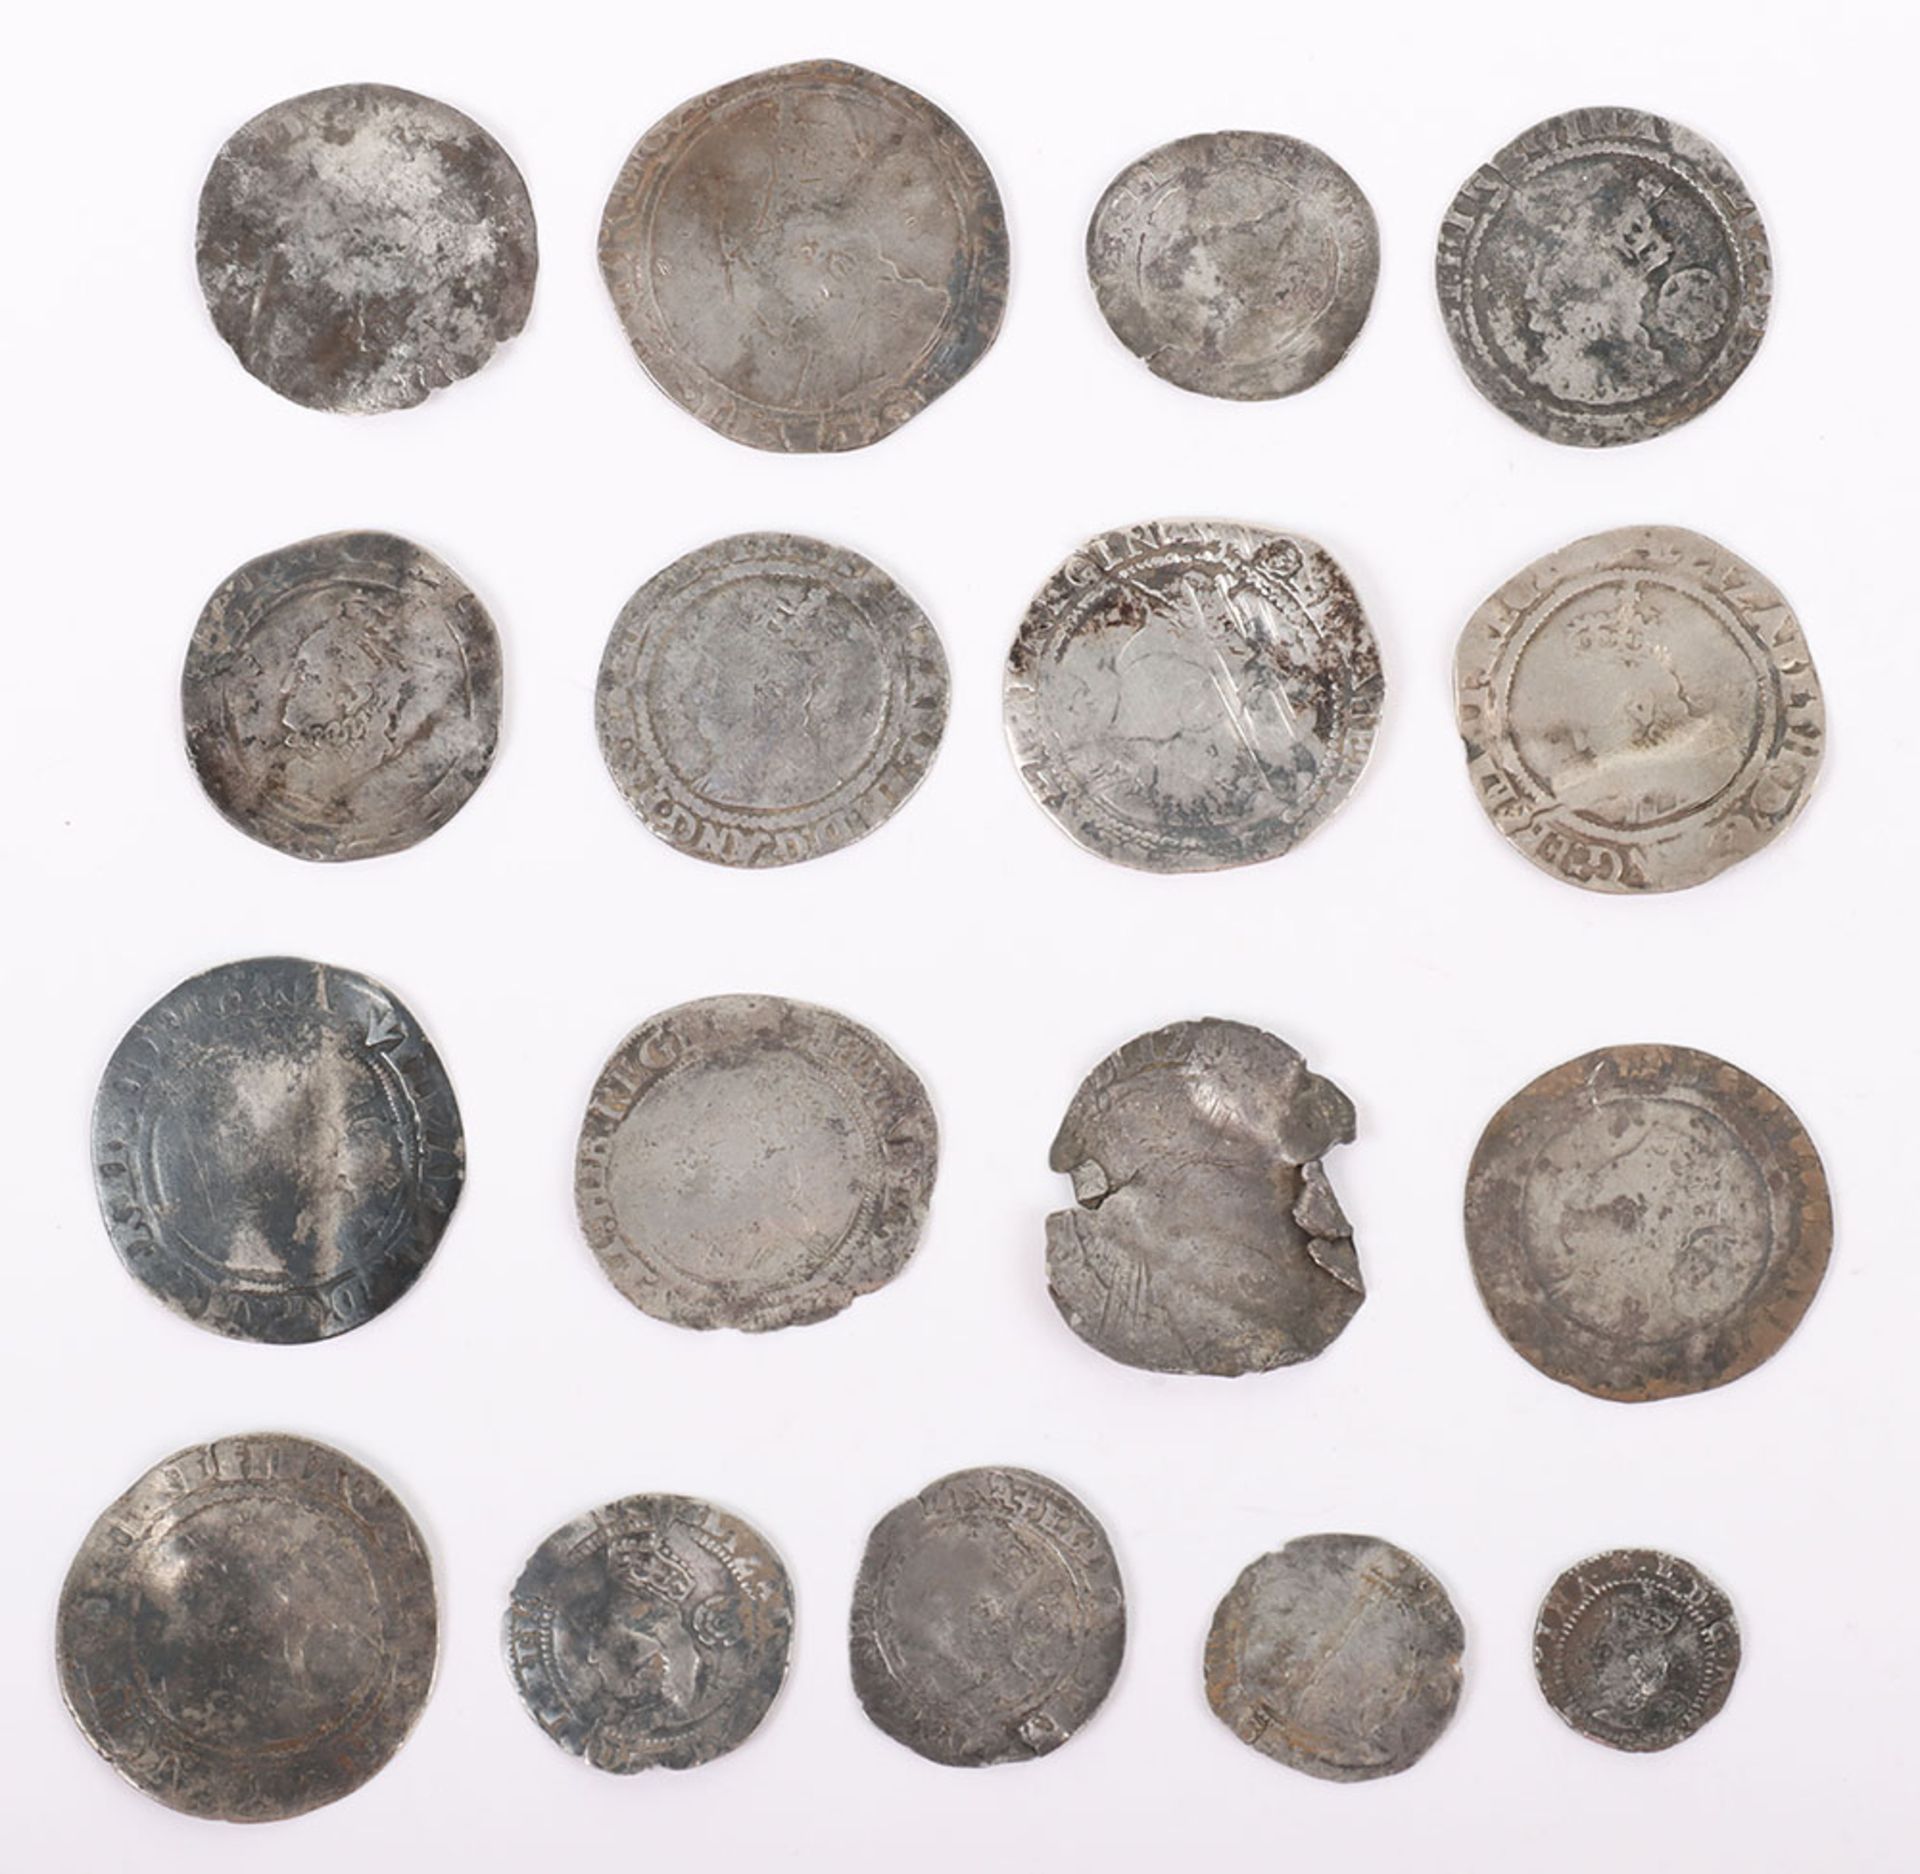 Elizabeth I (1558-1603), various shilling, sixpences, and pennies